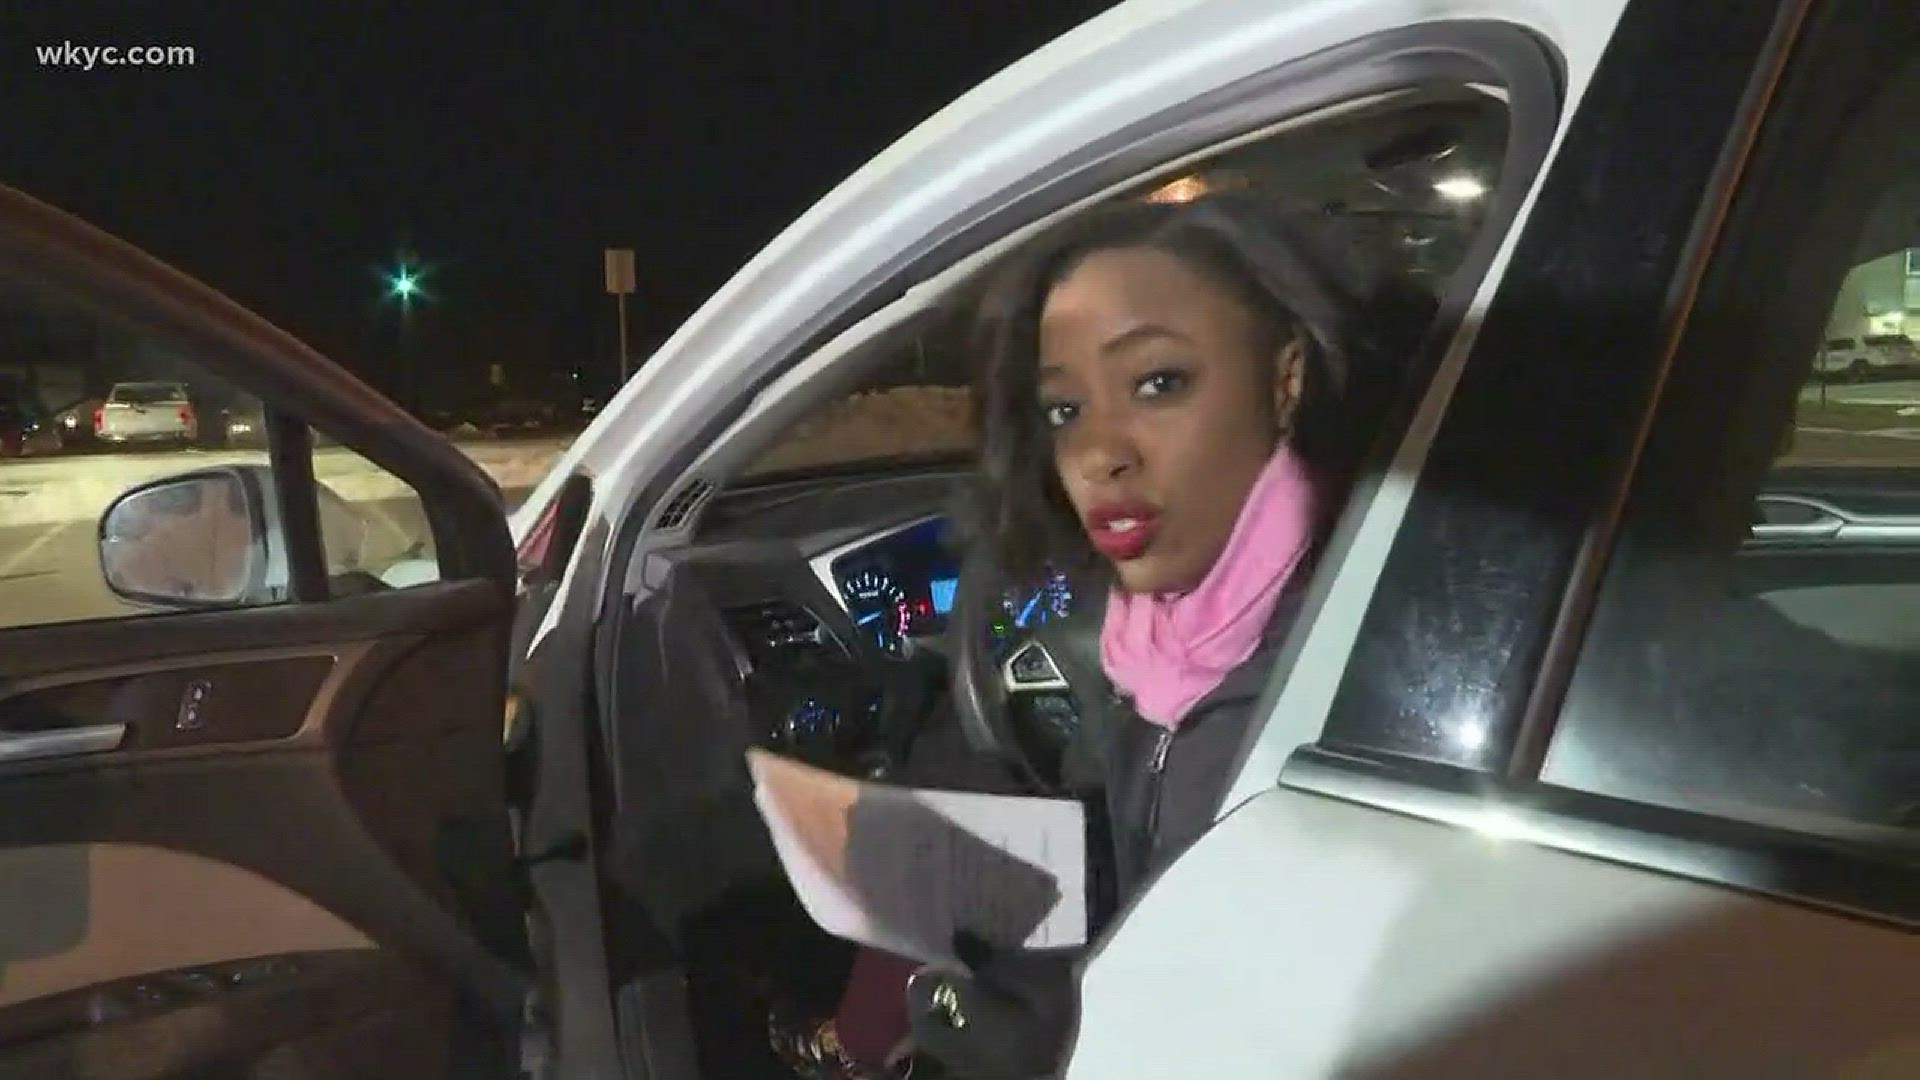 March 5, 2018: As another carjacking has hit Lakewood, WKYC's Jasmine Monroe has some tips on how to keep yourself safe.